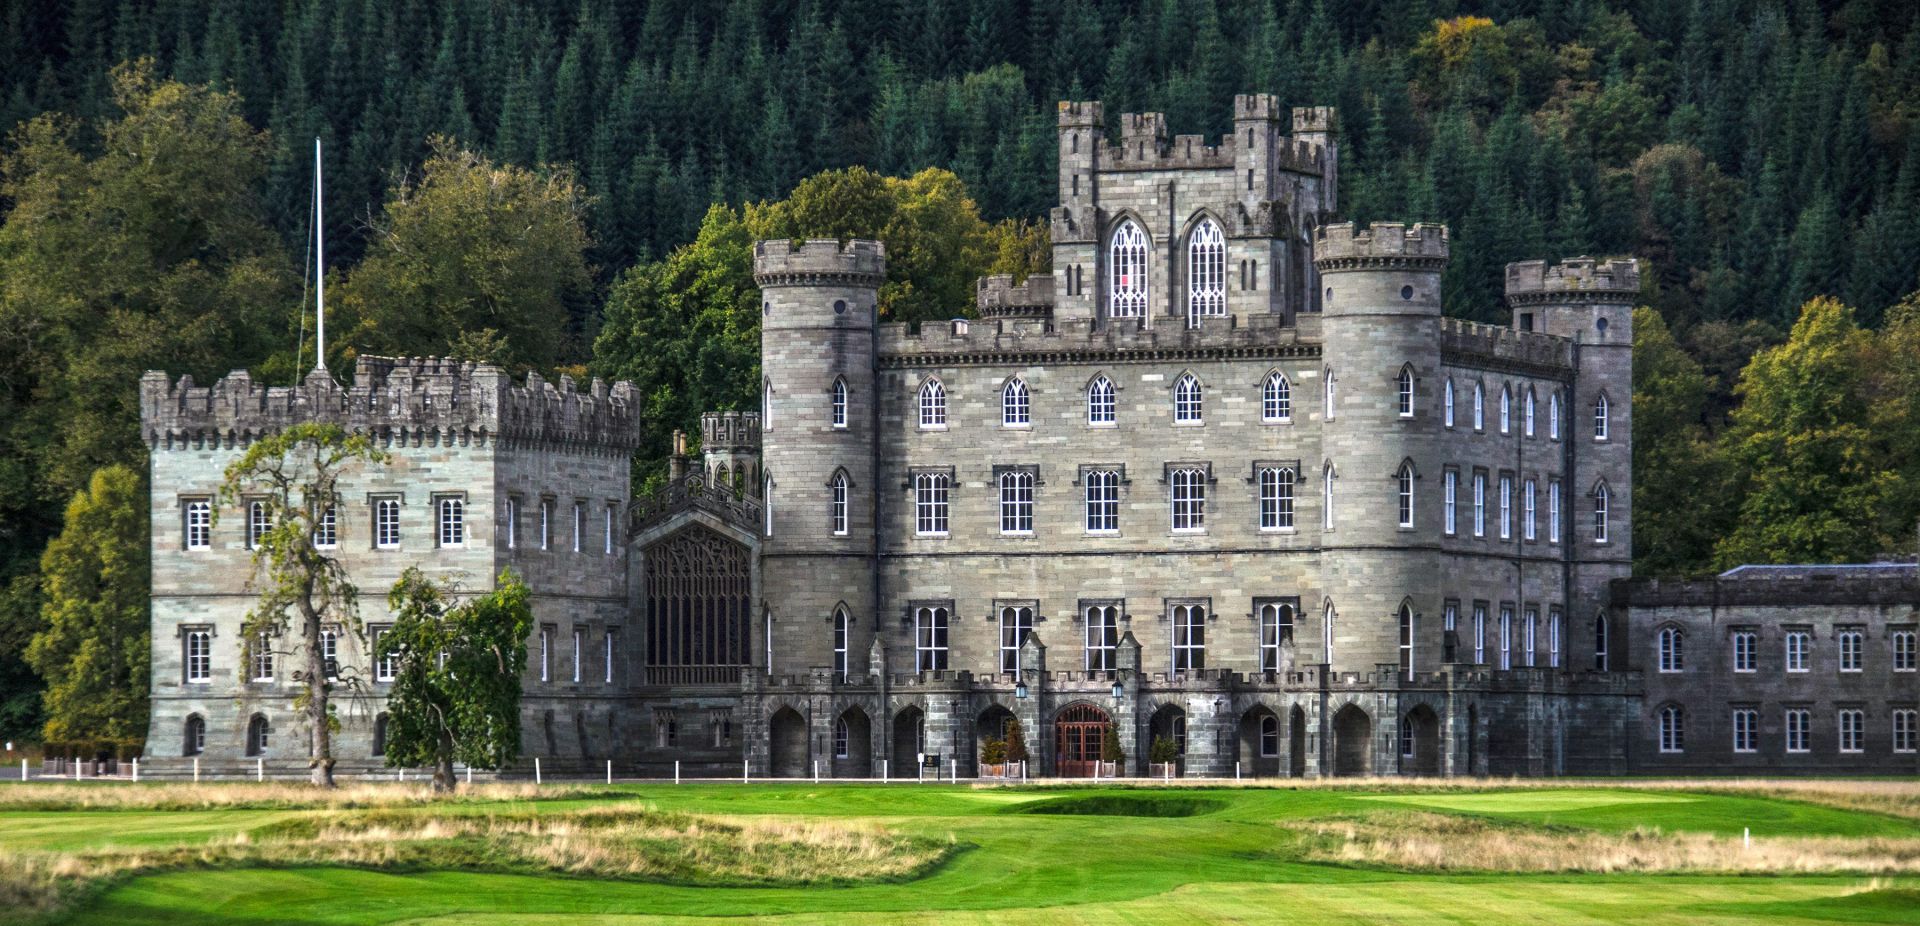 Taymouth Castle in Kenmore